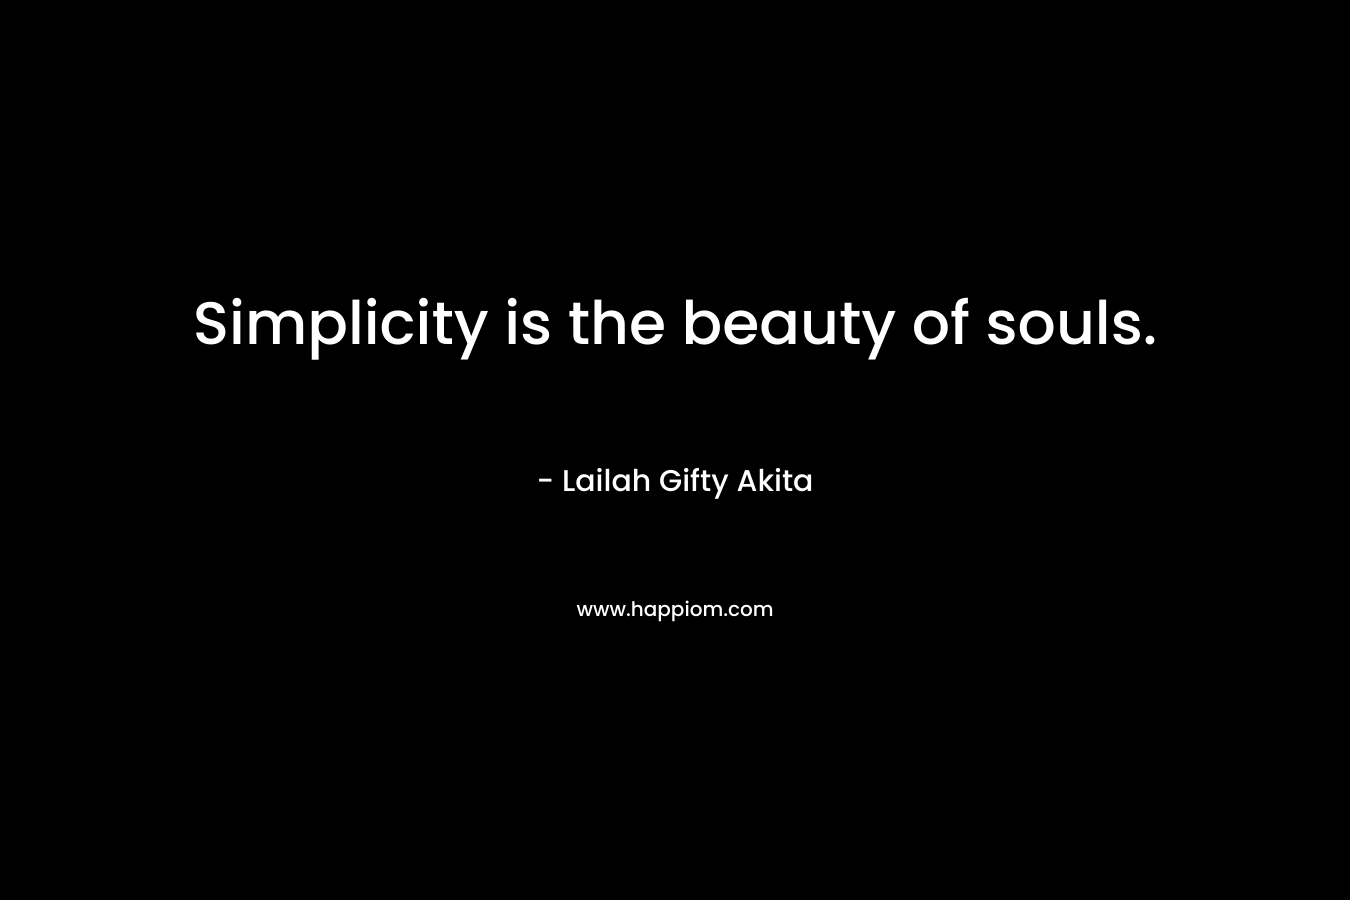 Simplicity is the beauty of souls.